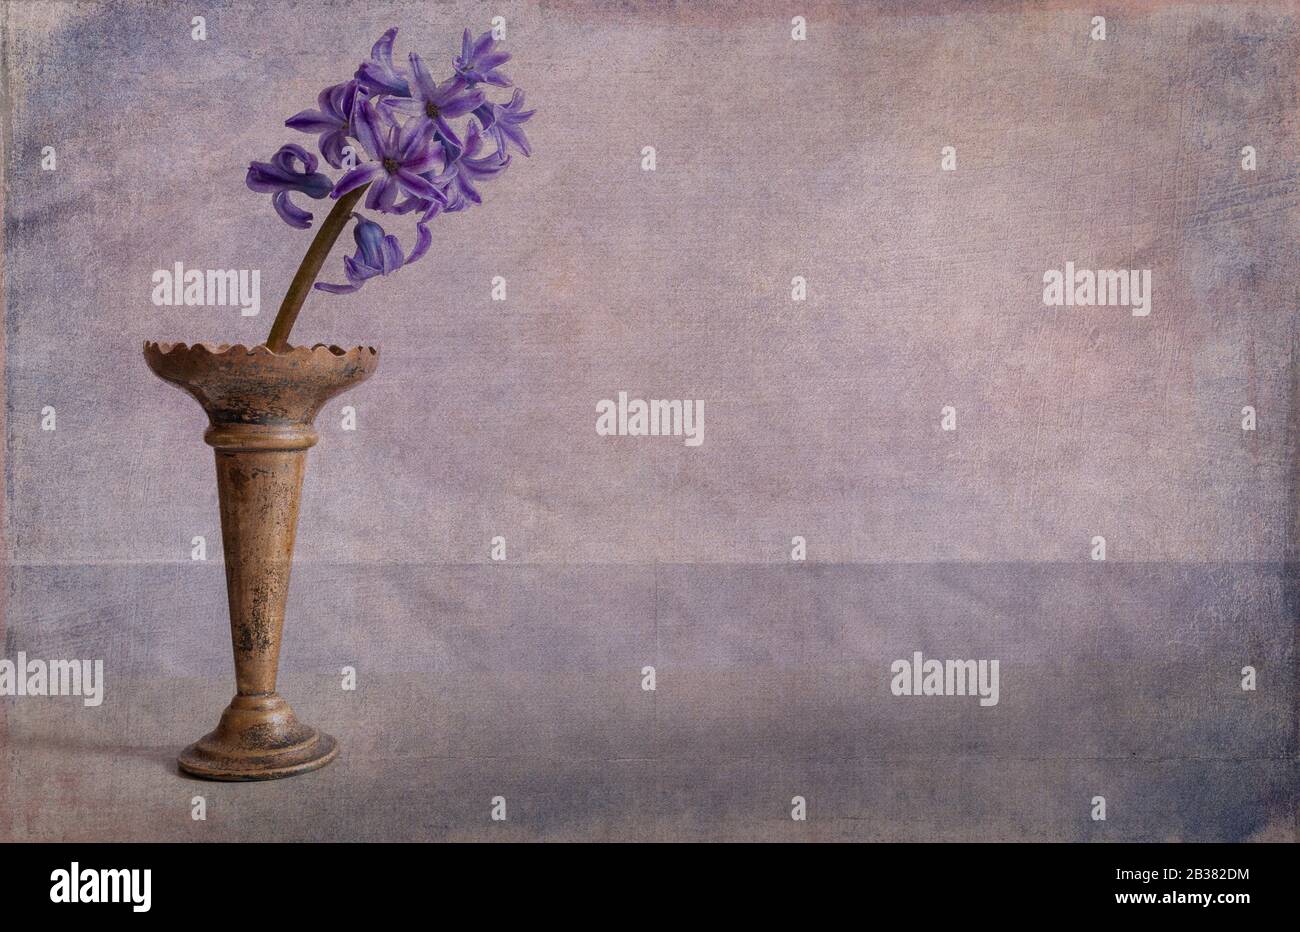 single Bluebell  in old metal vase textured painterly  minimalist image with room for text, concept spring. Stock Photo